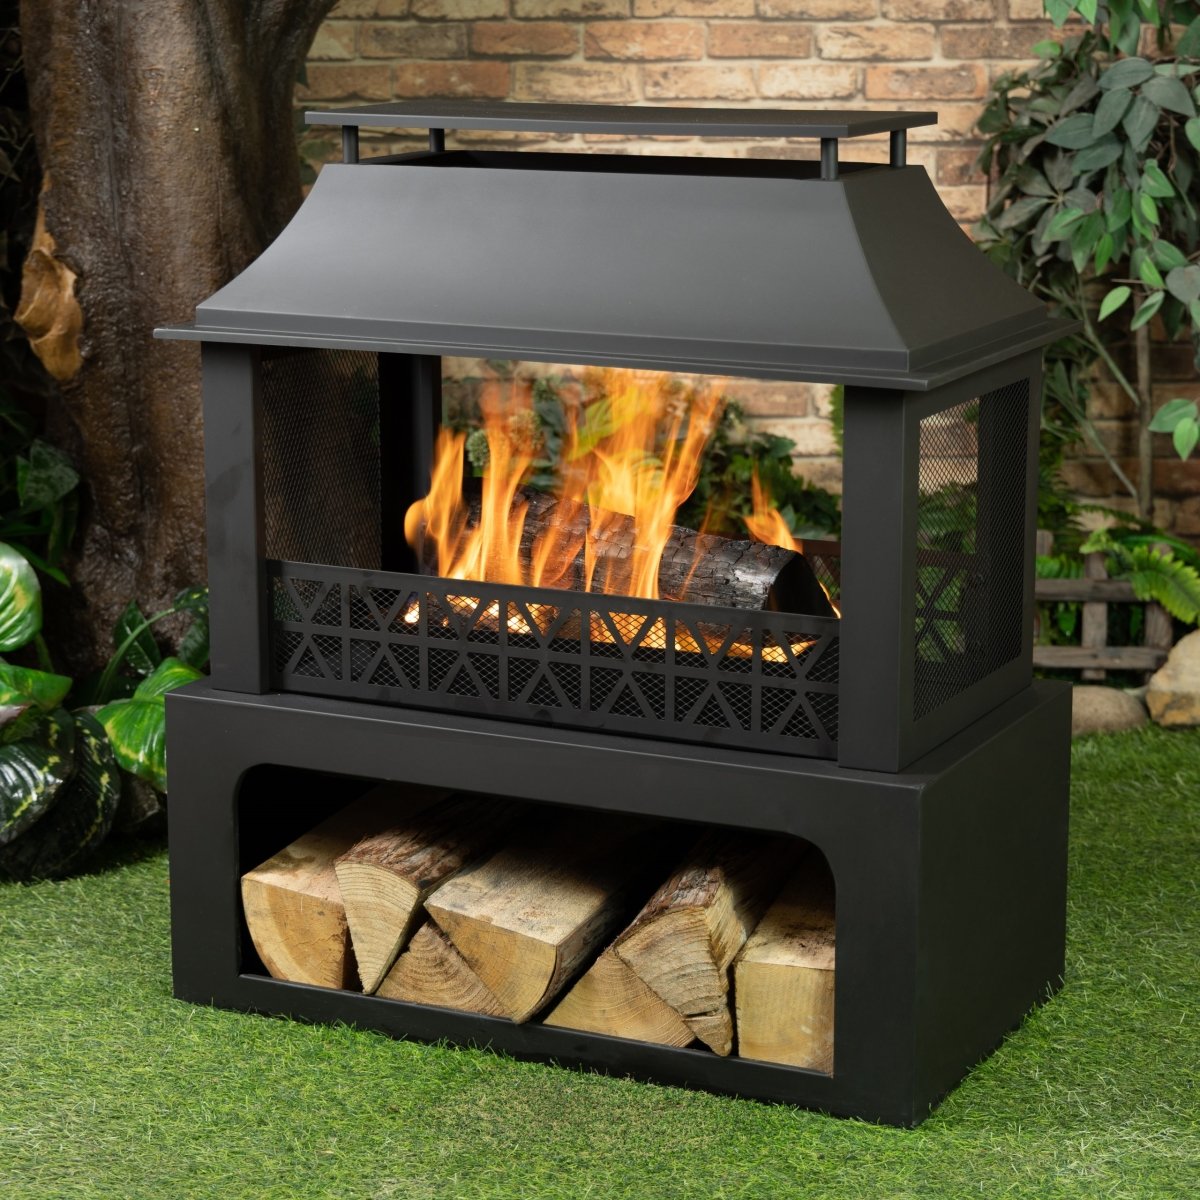 Picture of Deko Living COB10511 36 in. Rectangular Outdoor Steel Woodburning Fireplace with Log Storage Compartment